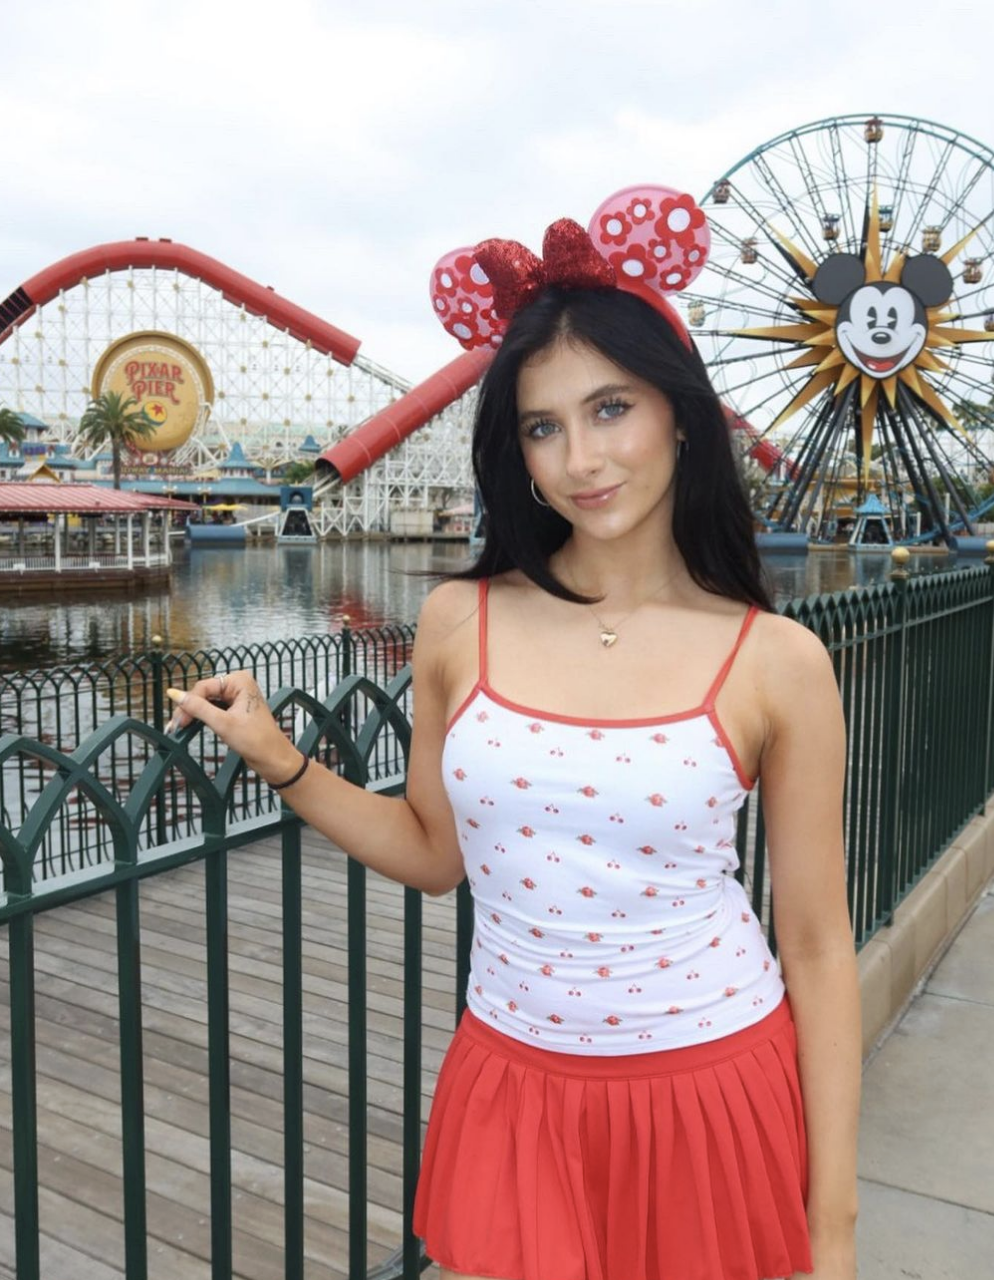 A woman wearing Minnie Mouse ears, a white tank top with small red patterns, and a red skirt poses in front of a theme park featuring a Ferris wheel with Mickey Mouse and a roller coaster